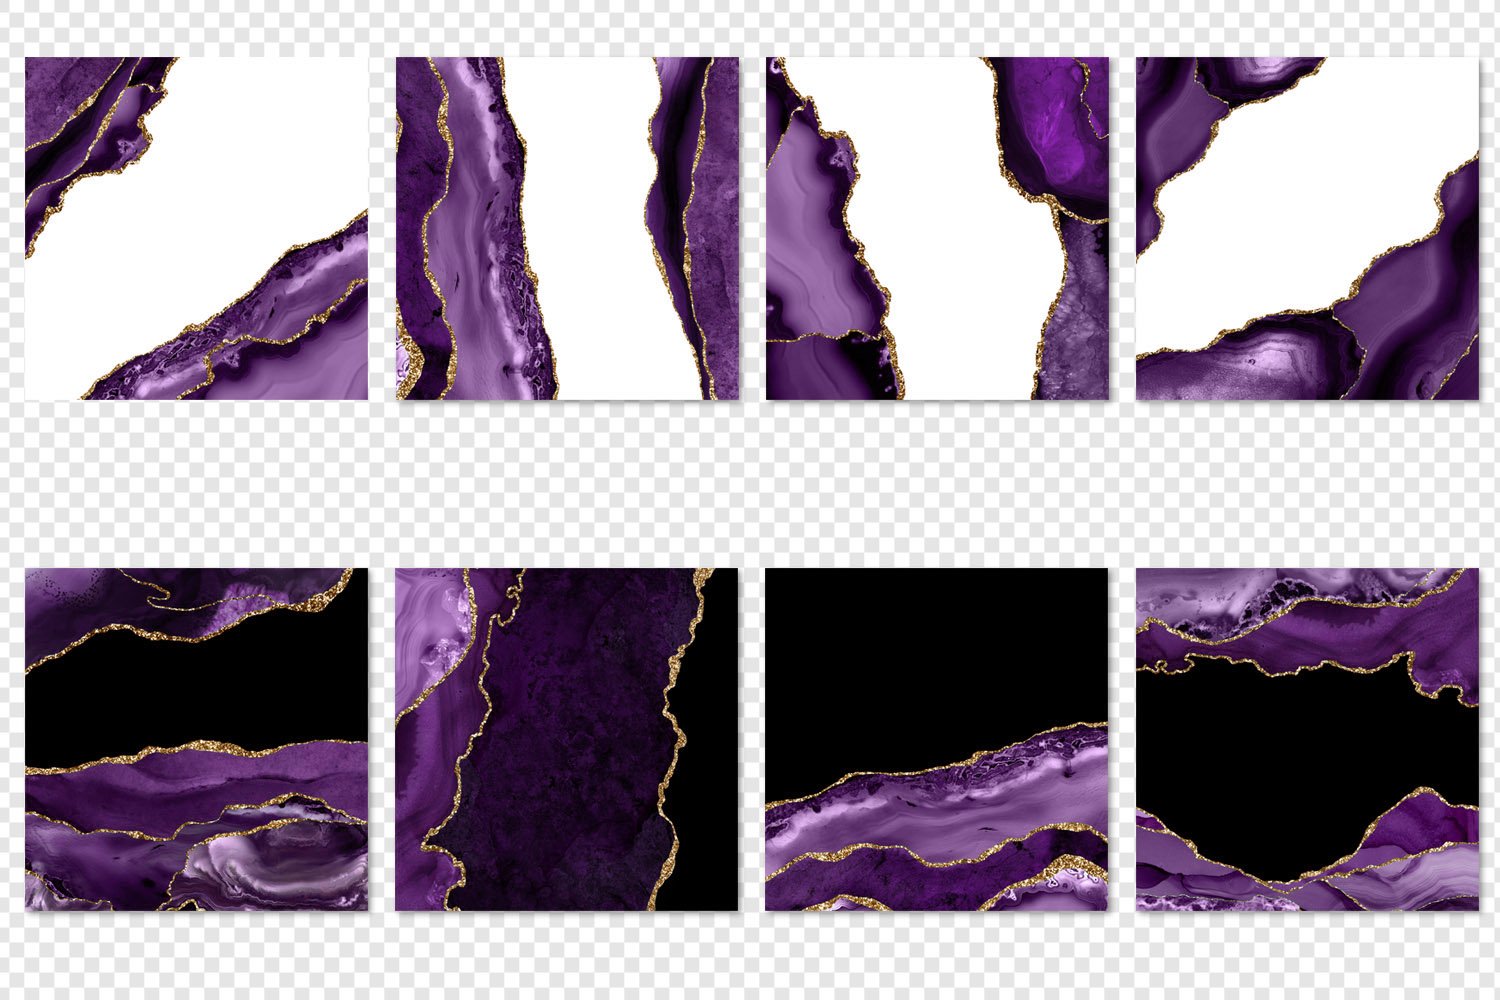 Purple & Gold Agate Borders preview image.